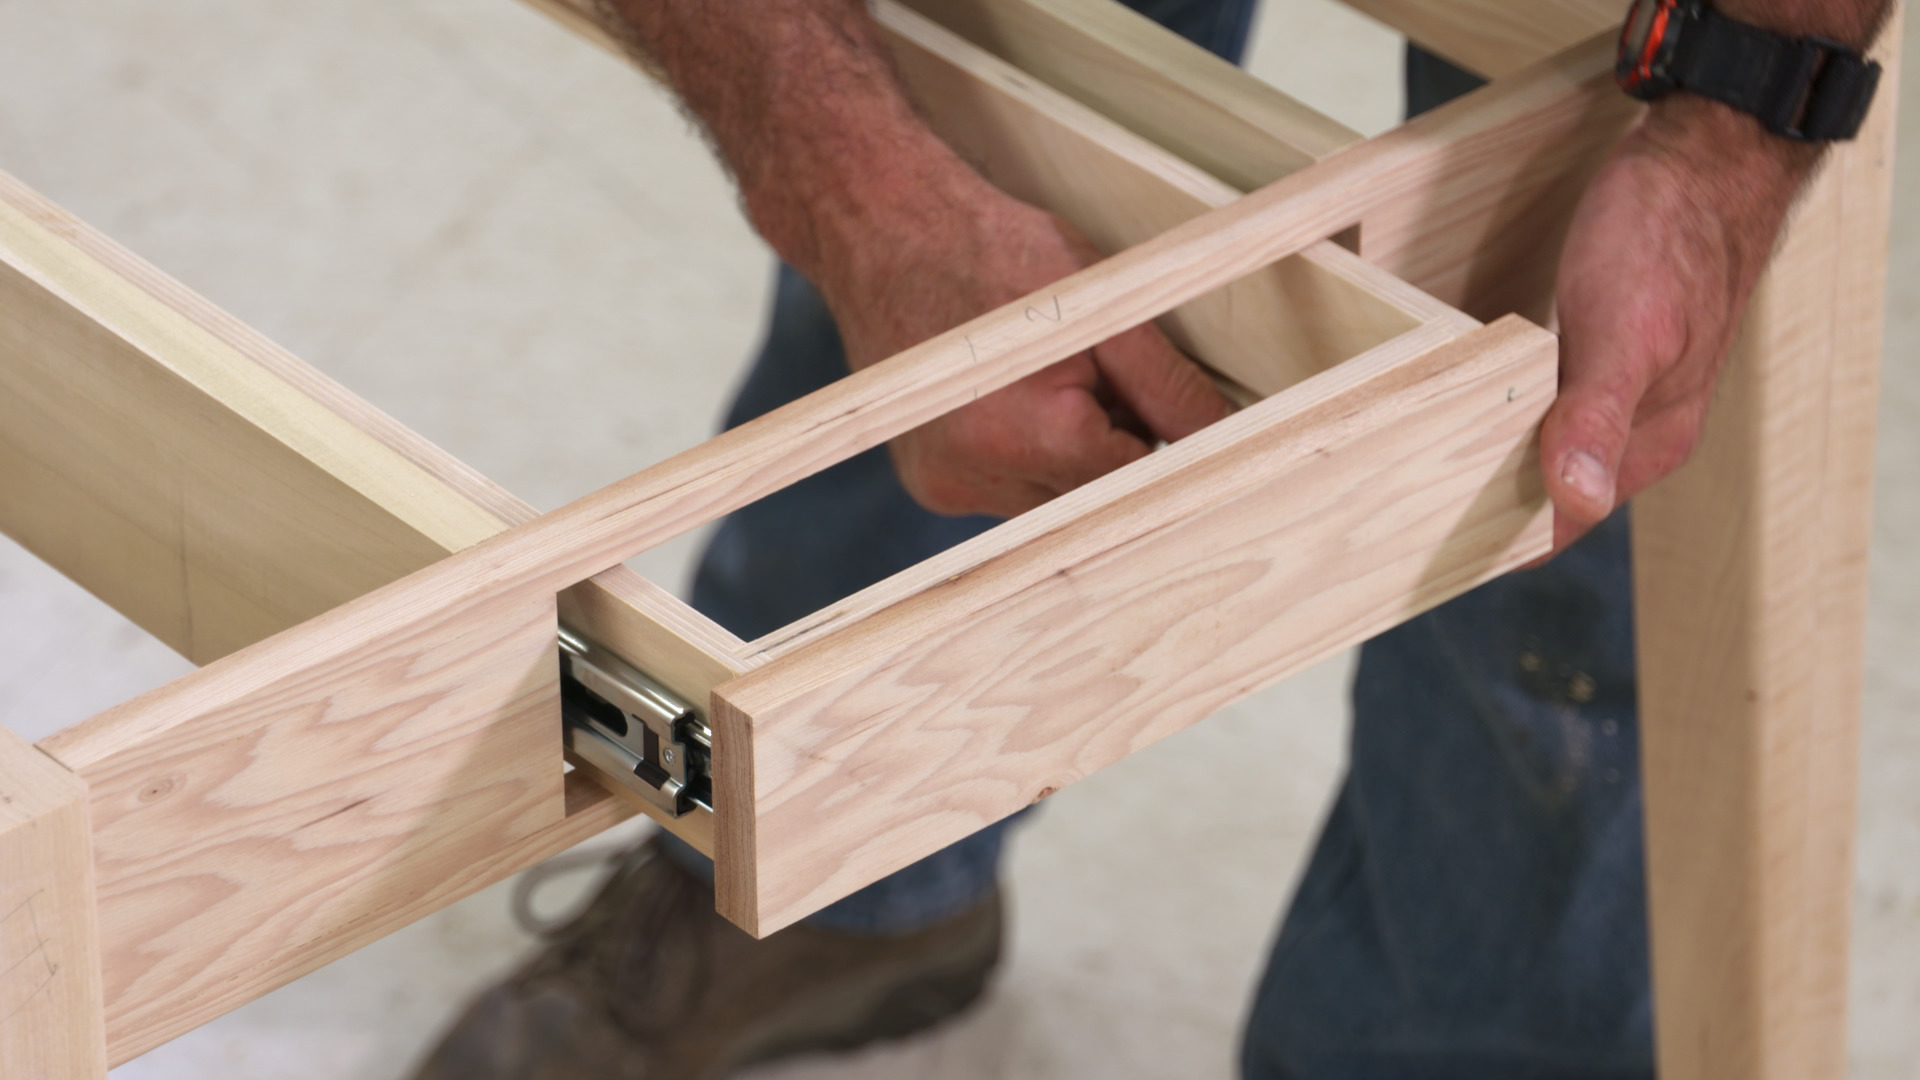 Install the Drawer Slides and Drawer Front